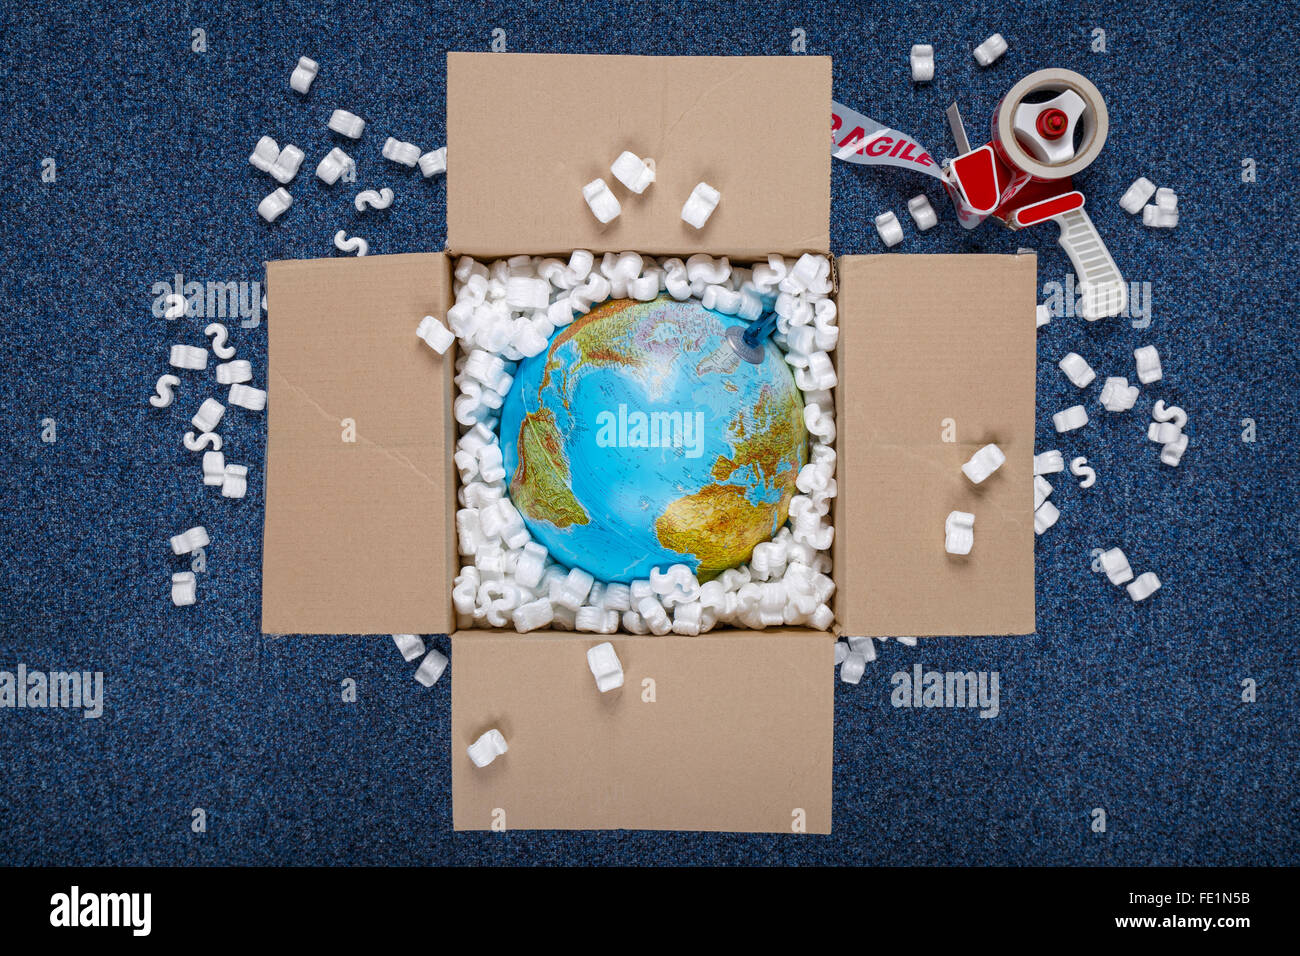 A world globe in a box surrounded by packing chips with Fragile tape. Good image for international delivery concepts. Stock Photo